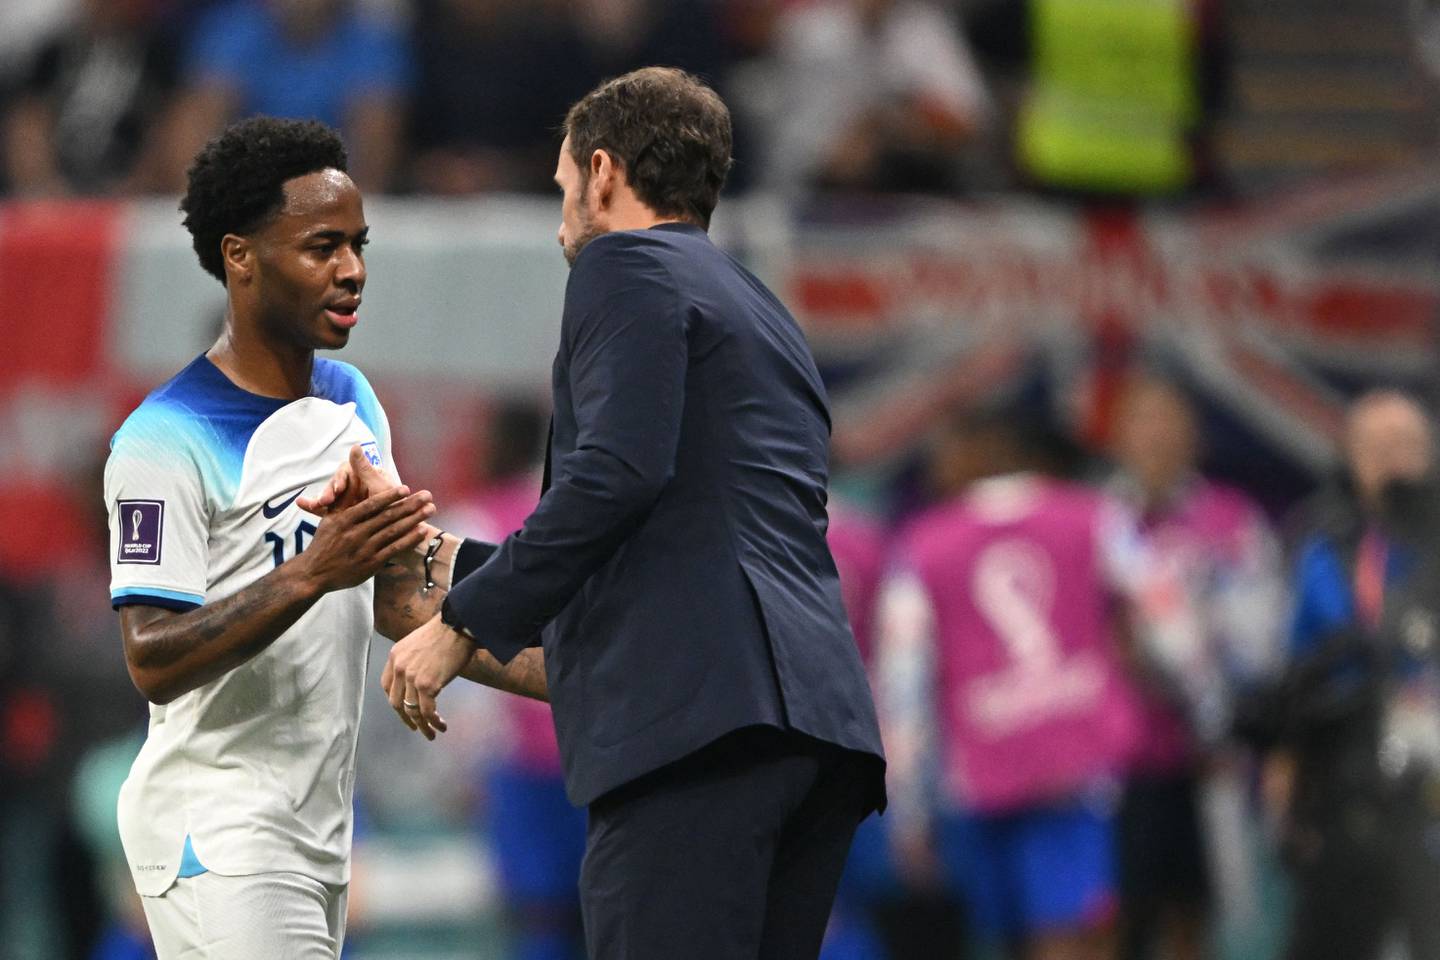 England forward Raheem Sterling shakes hands with head coach Gareth Southgate as he leaves the pitch. AFP